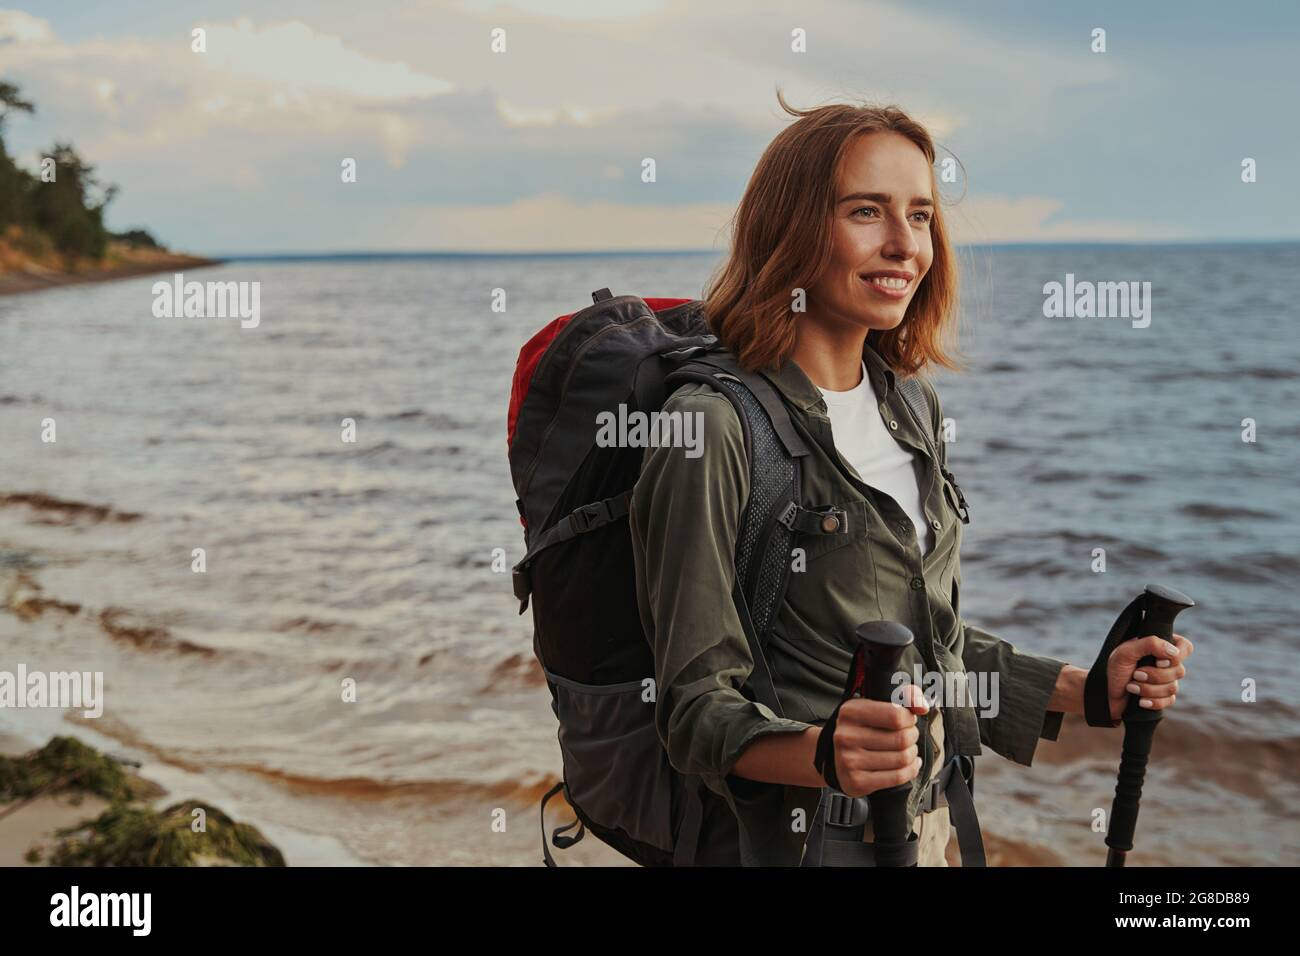 Positive tourist staring forward while doing Nordic walking Stock Photo